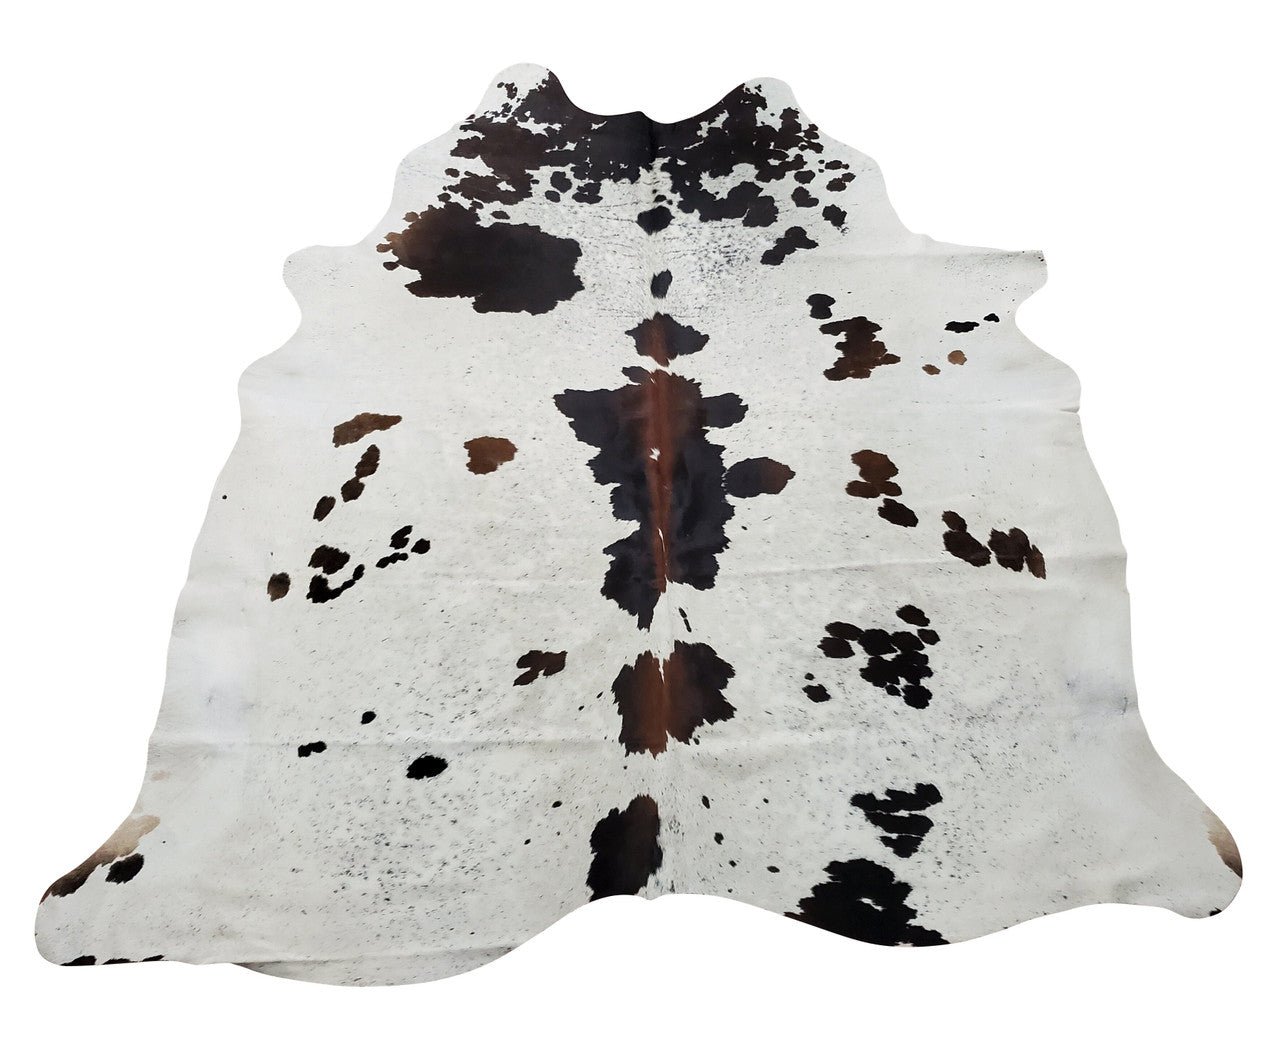 If you are browsing for a cowhide rug forever you will be so happy that you chose the speckled pattern! Looks super cute and feels great. Vacuums well, too! 